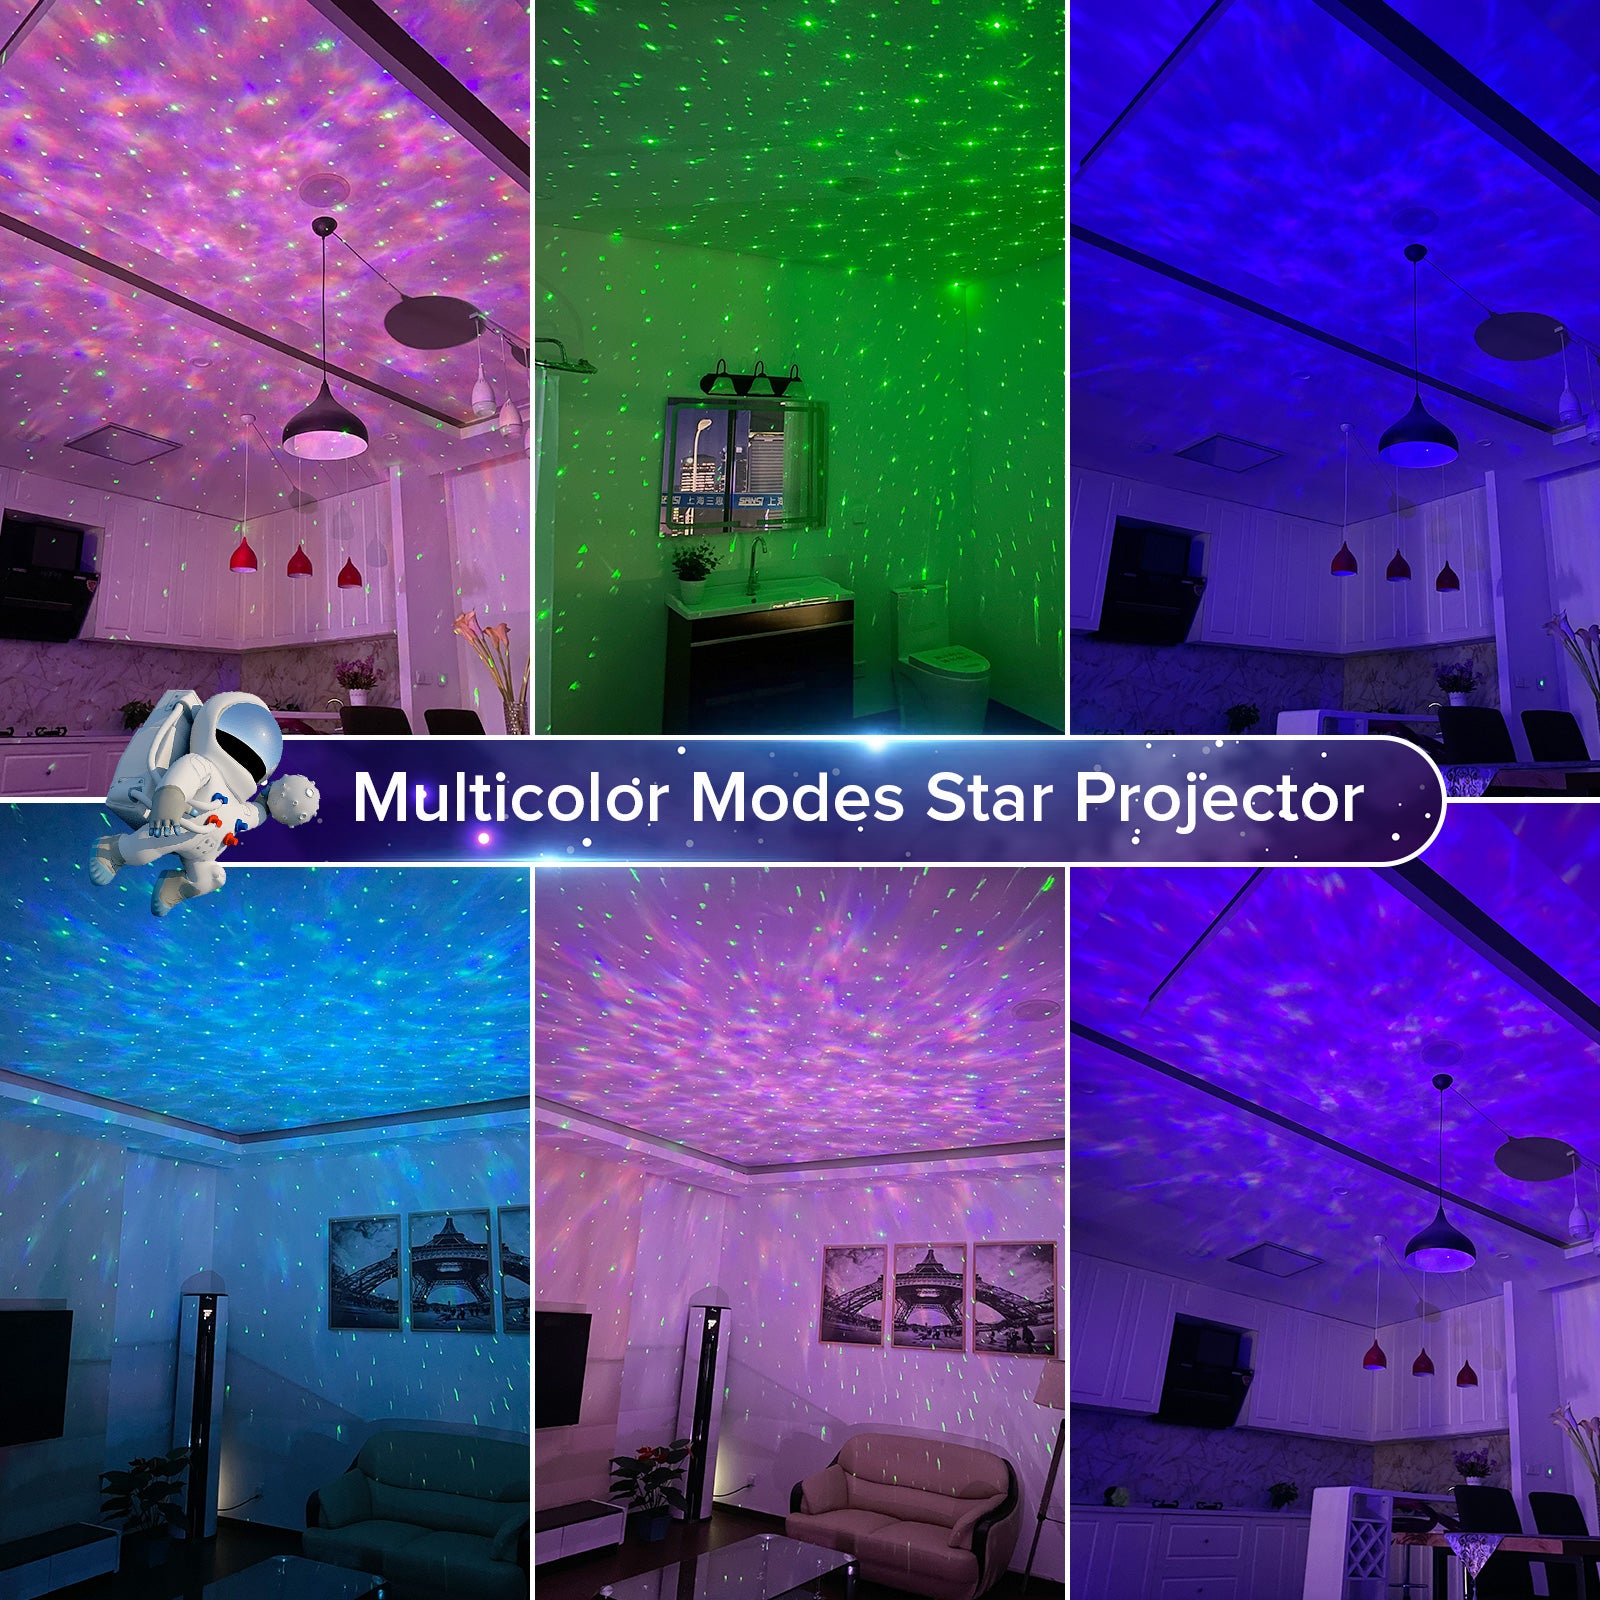 5W Star Projector (US ONLY) has multi color modes.